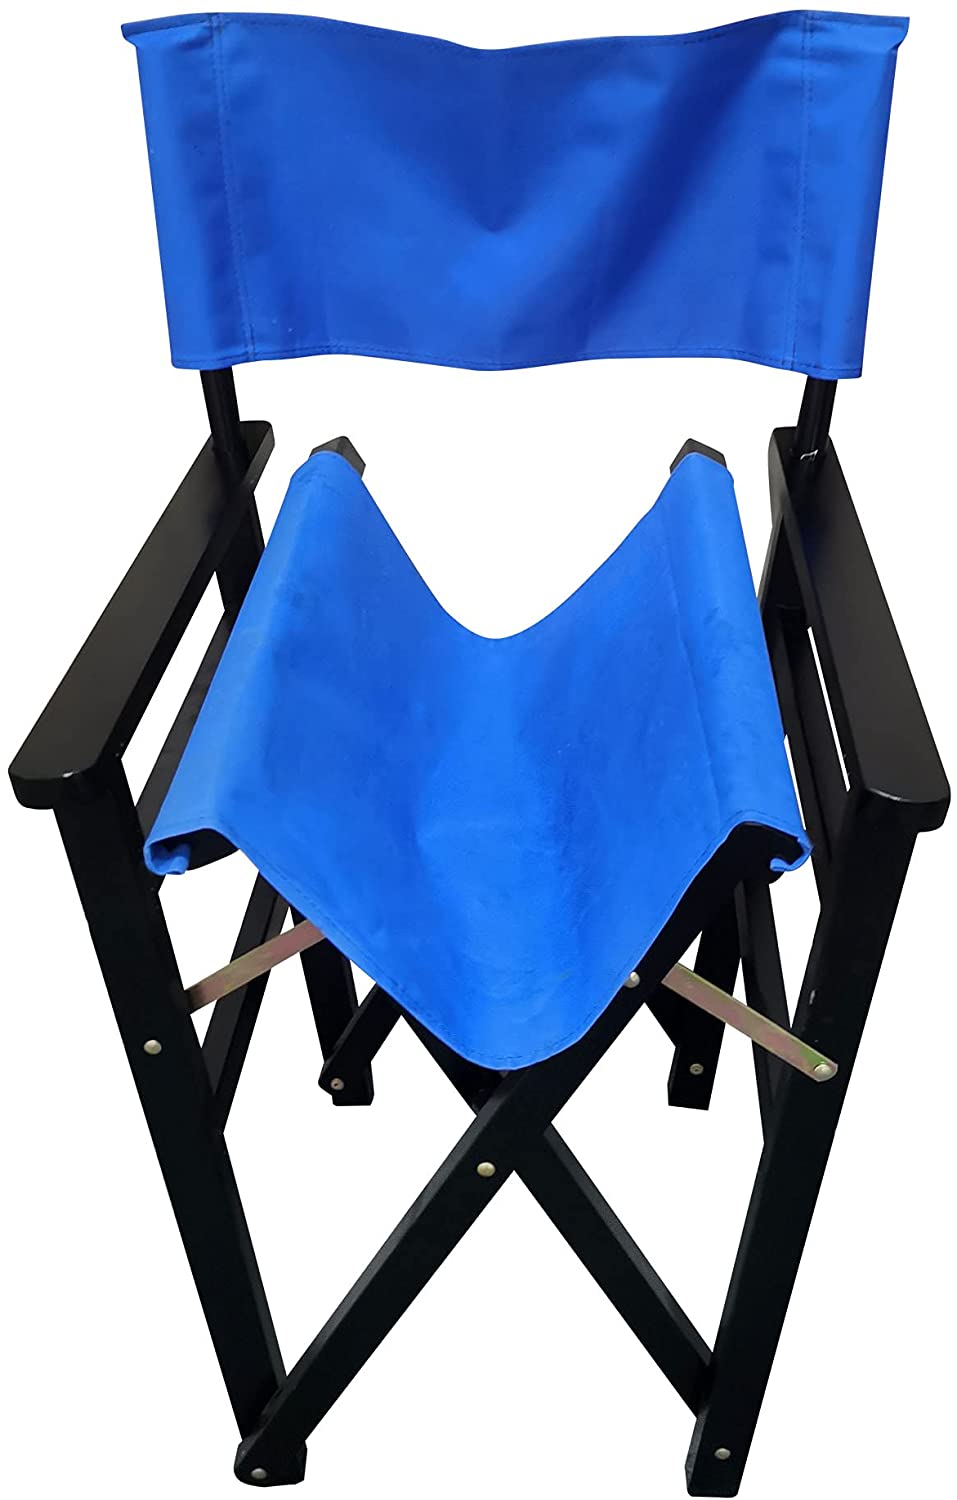 2 PCS Wooden Folding Director Chair, Outdoor Folding Wood Chair Set, Canvas Folding Chair for Balcony, Courtyard, Fishing, Camping (Blue) - image 3 of 15